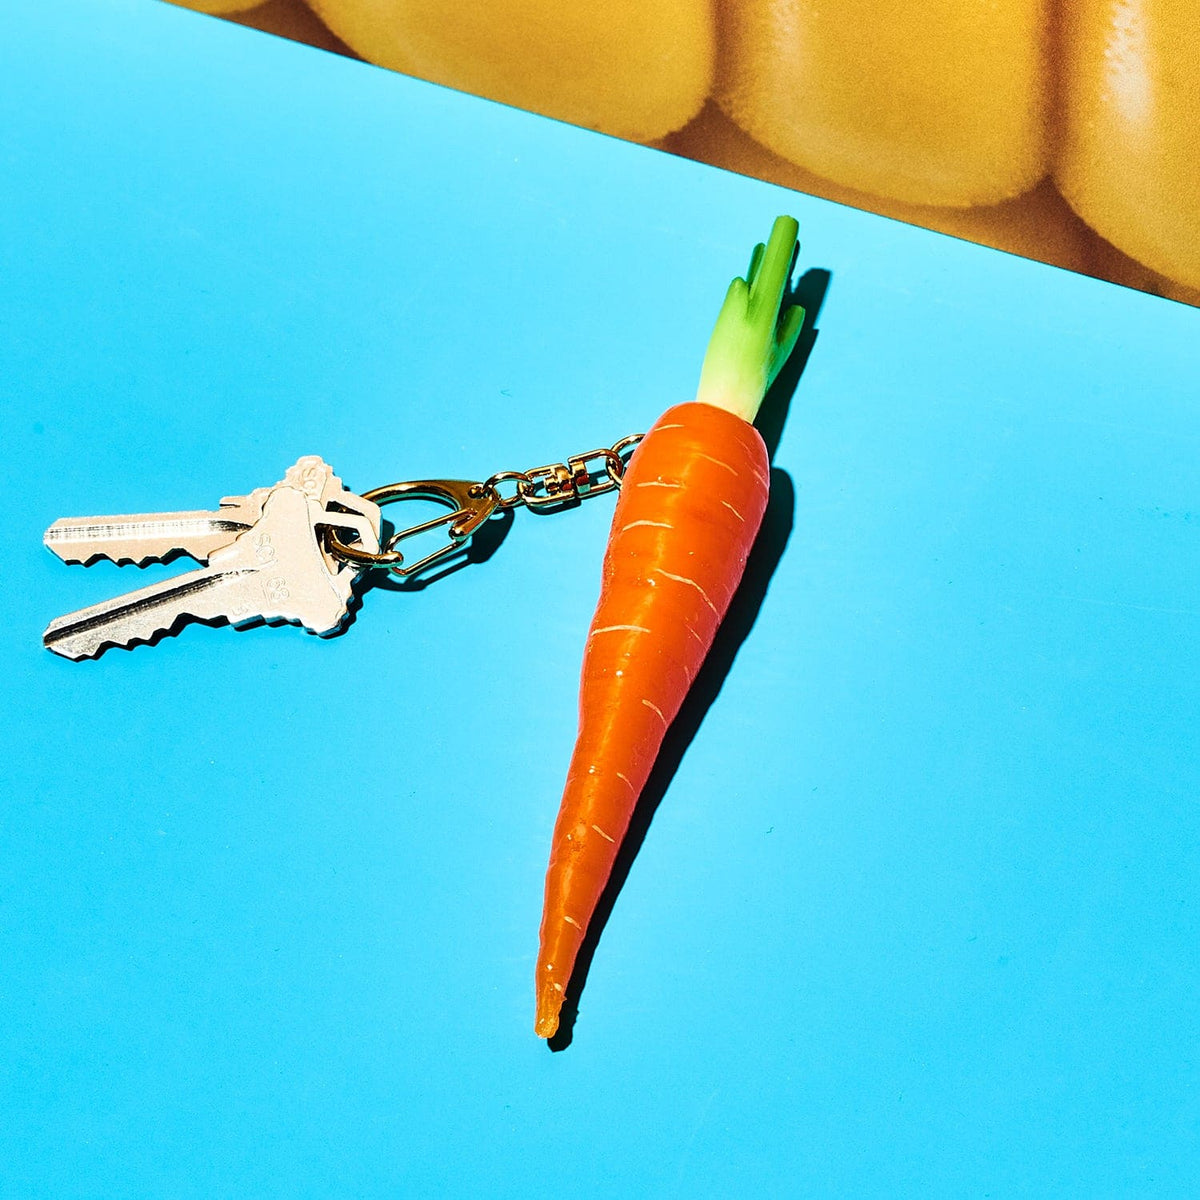 Carrot Food Keychain Accessory - Carrot - Food Novelty -